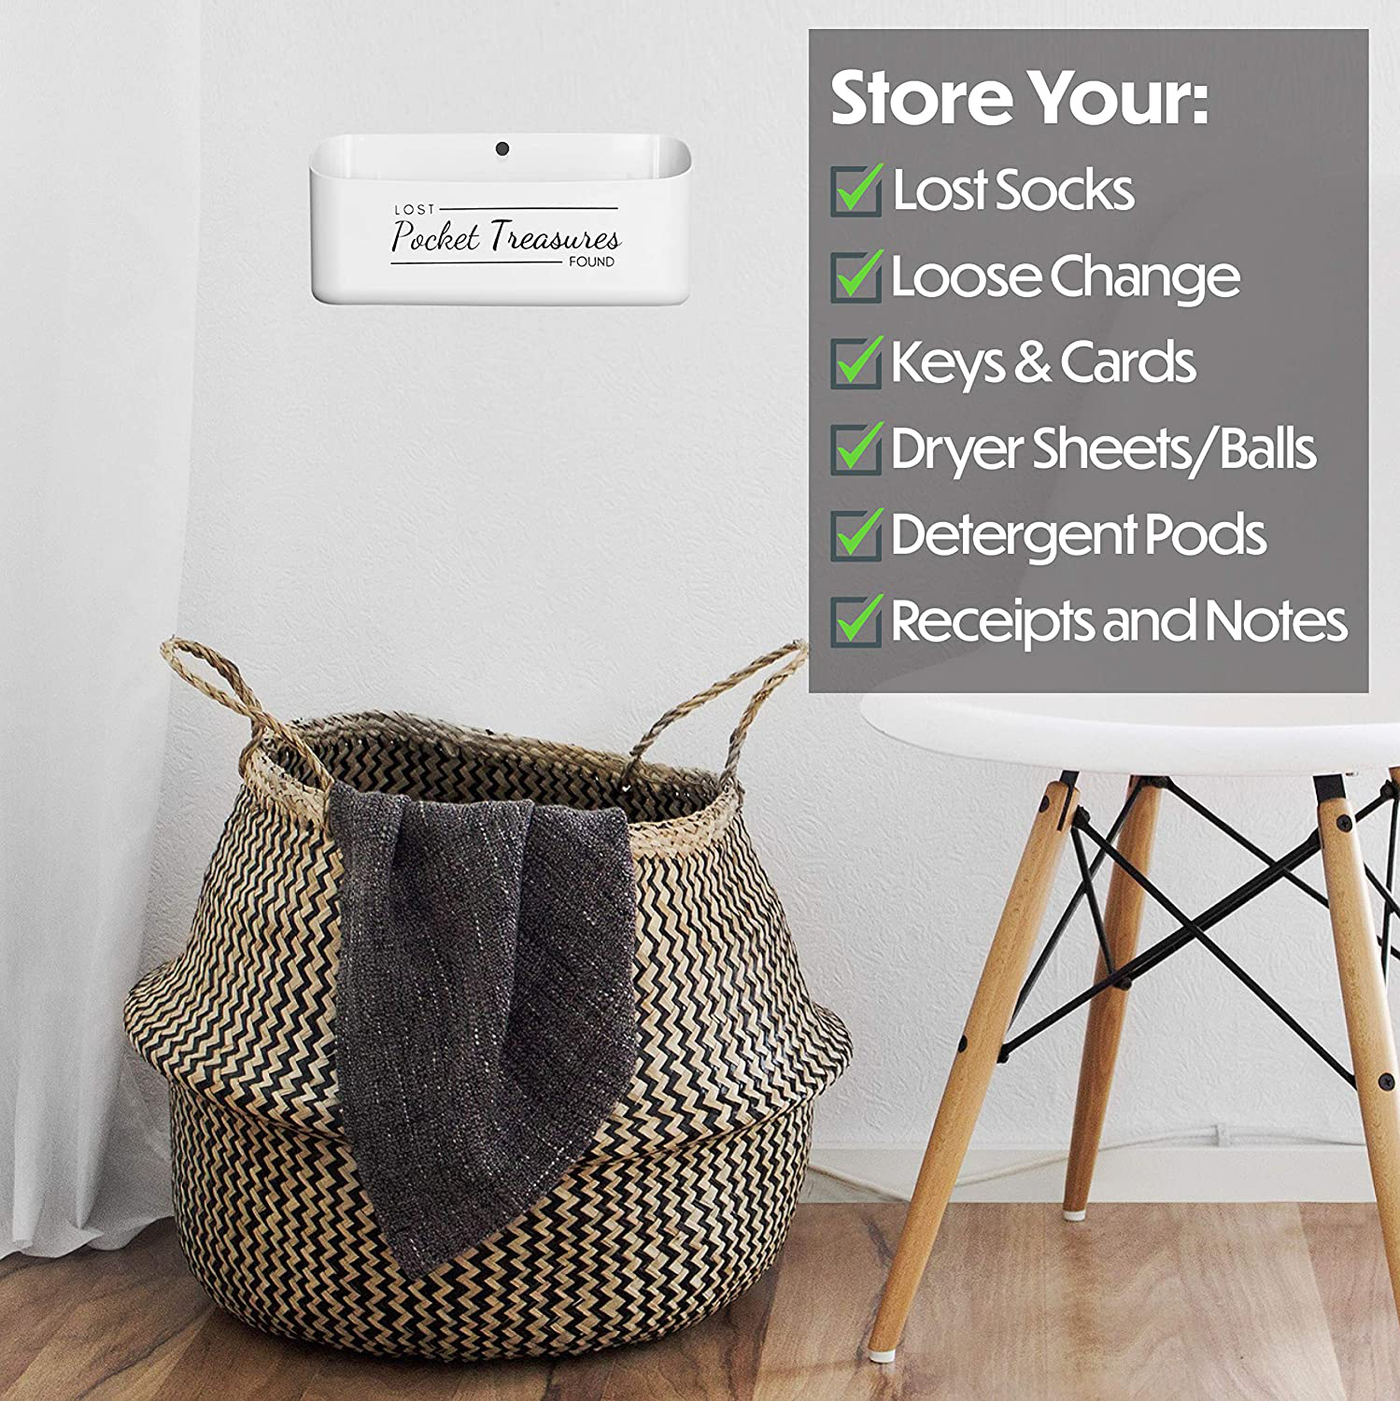 Lost Socks Sign Farmhouse Laundry Room Decor and Accessories Wire Baskets For Organizing Laundry Room Storage Organization Hanging Wall Basket Decor Shelves Organizer Lint Bin Signs